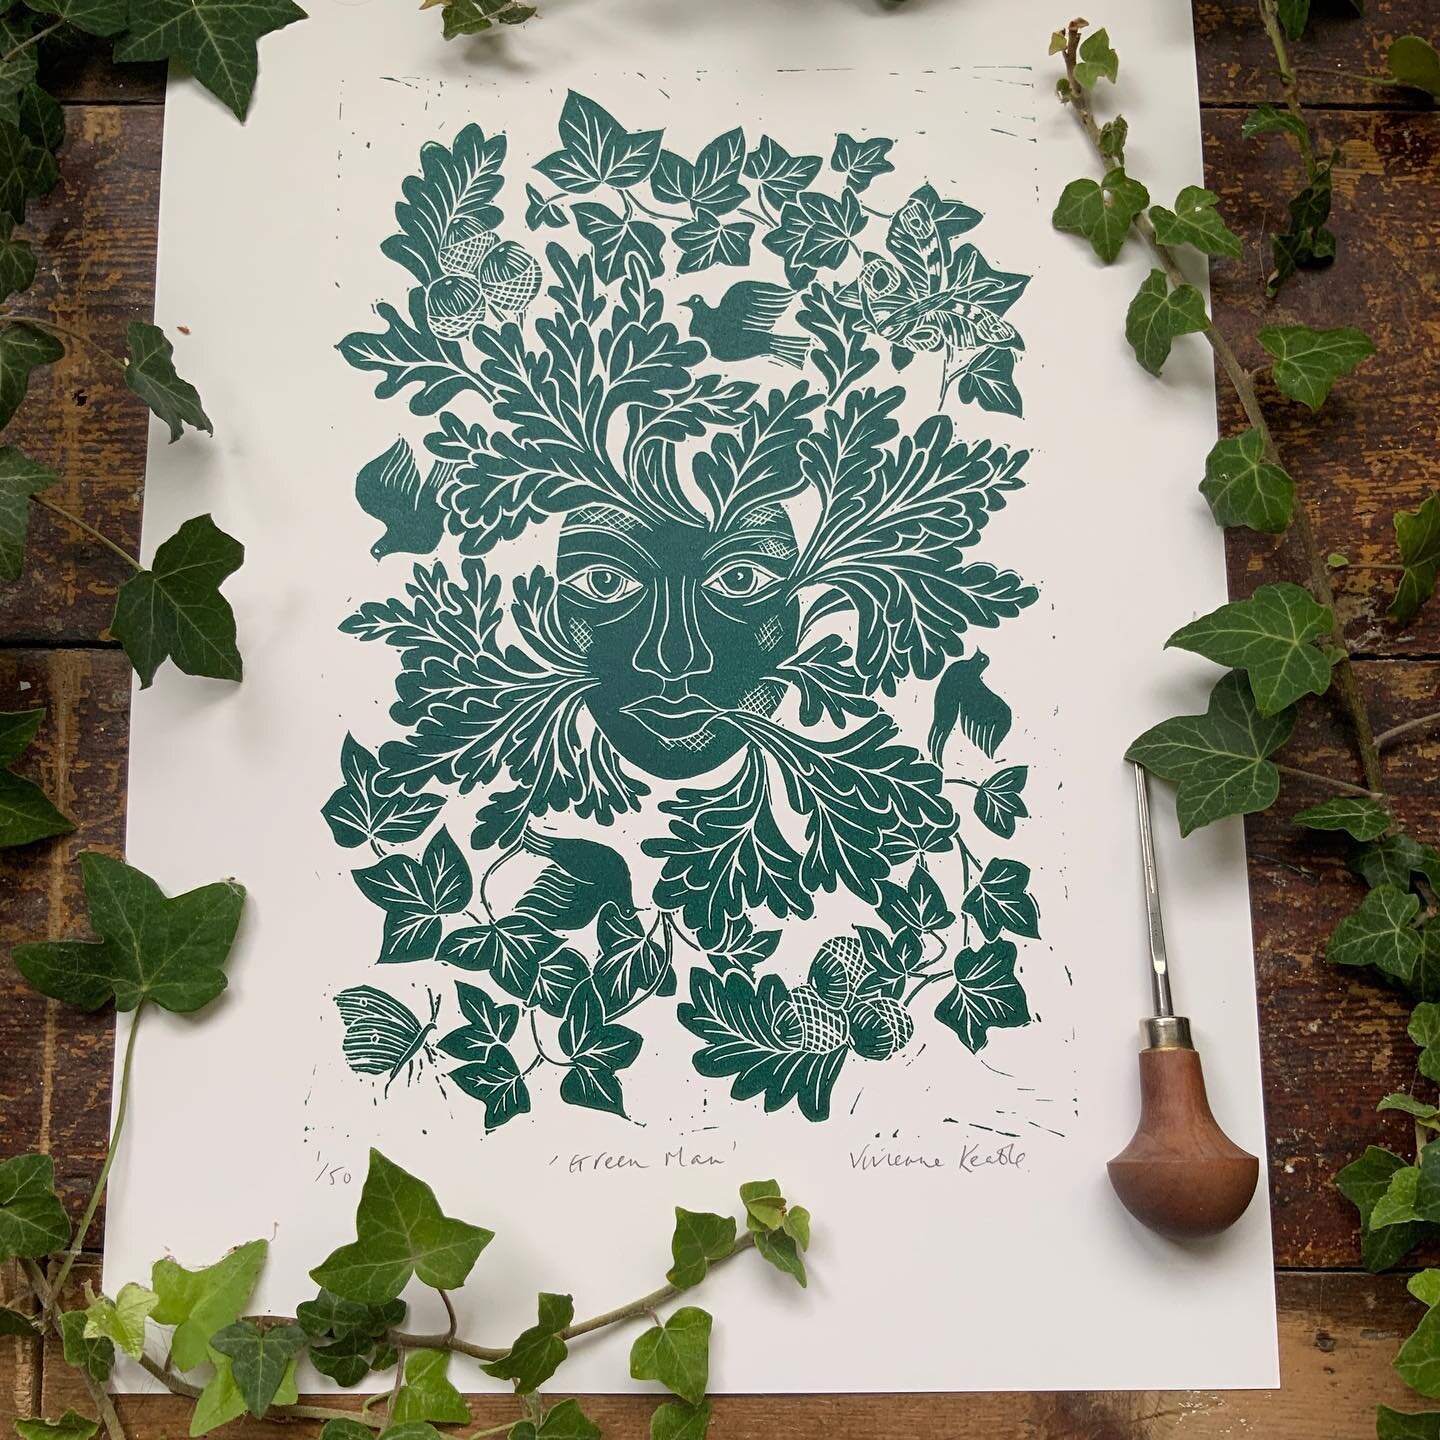 Here&rsquo;s my new print! 

It&rsquo;s a Green Man! Inspired by my meeting with a Druid and a week in Dorset. 

It&rsquo;s printed in a forest green on cartridge paper and it&rsquo;s A3 size. 

I&rsquo;ll be adding it my website later today! 🍃 🌱 ?